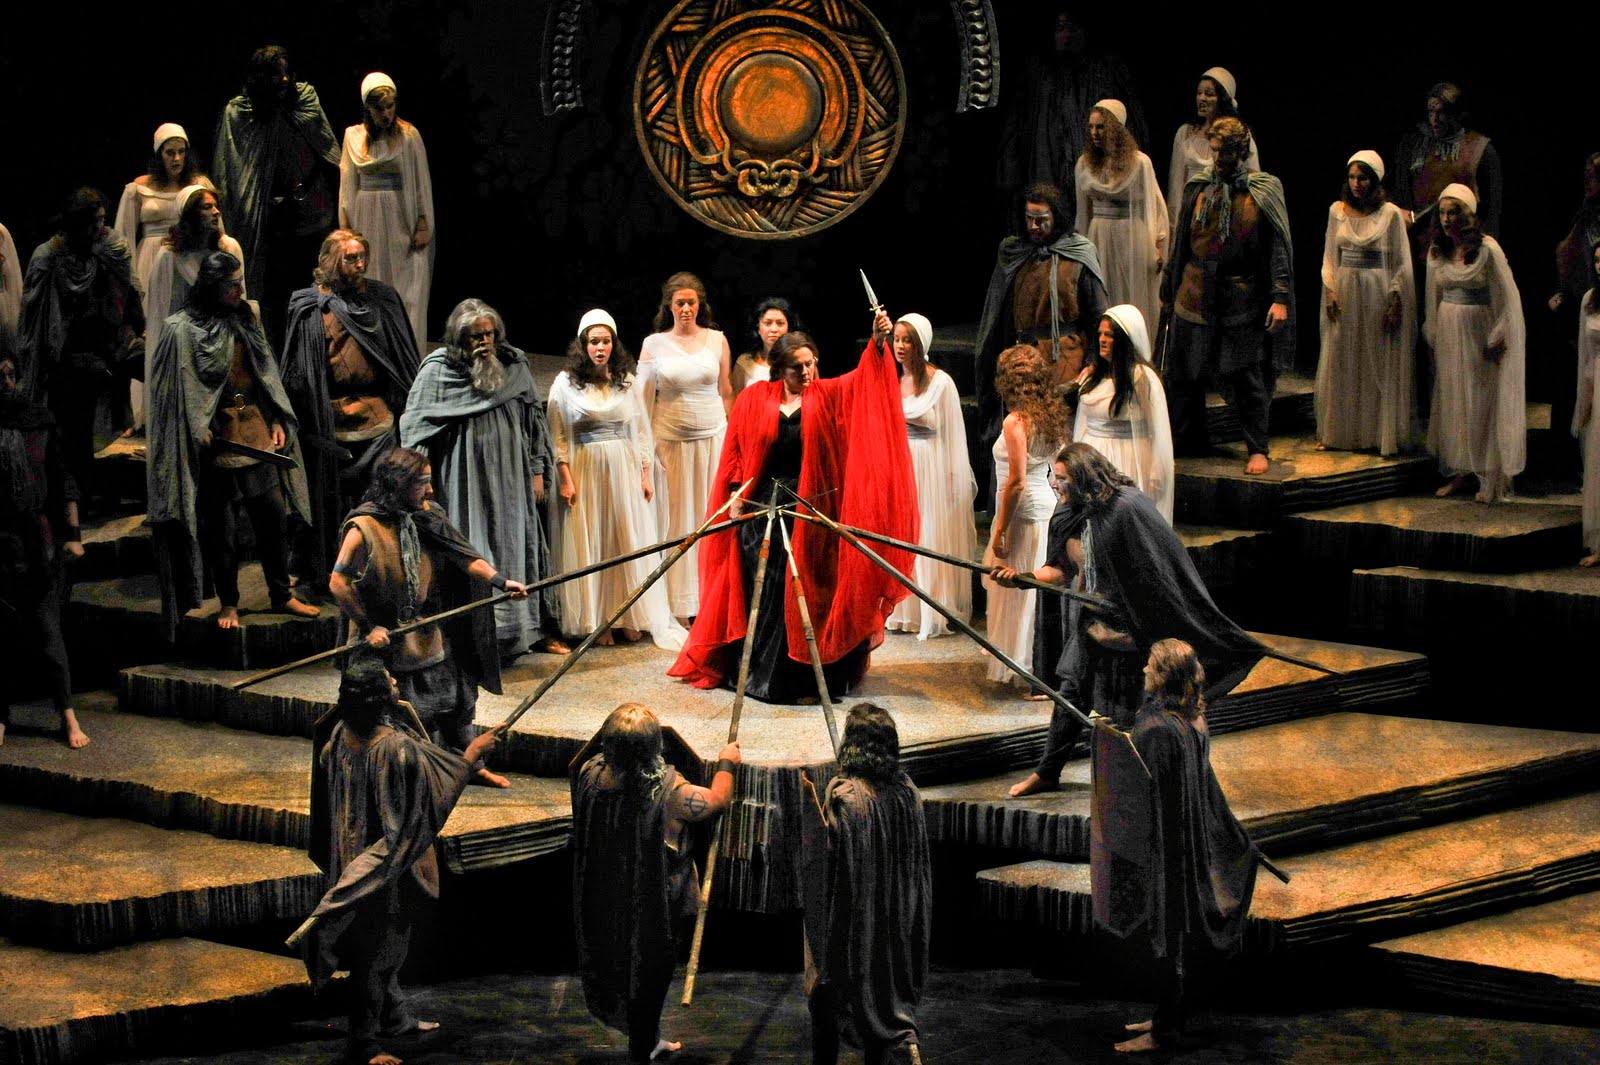 Scene from Act II of Norma where Norma wields the sacrificial dagger